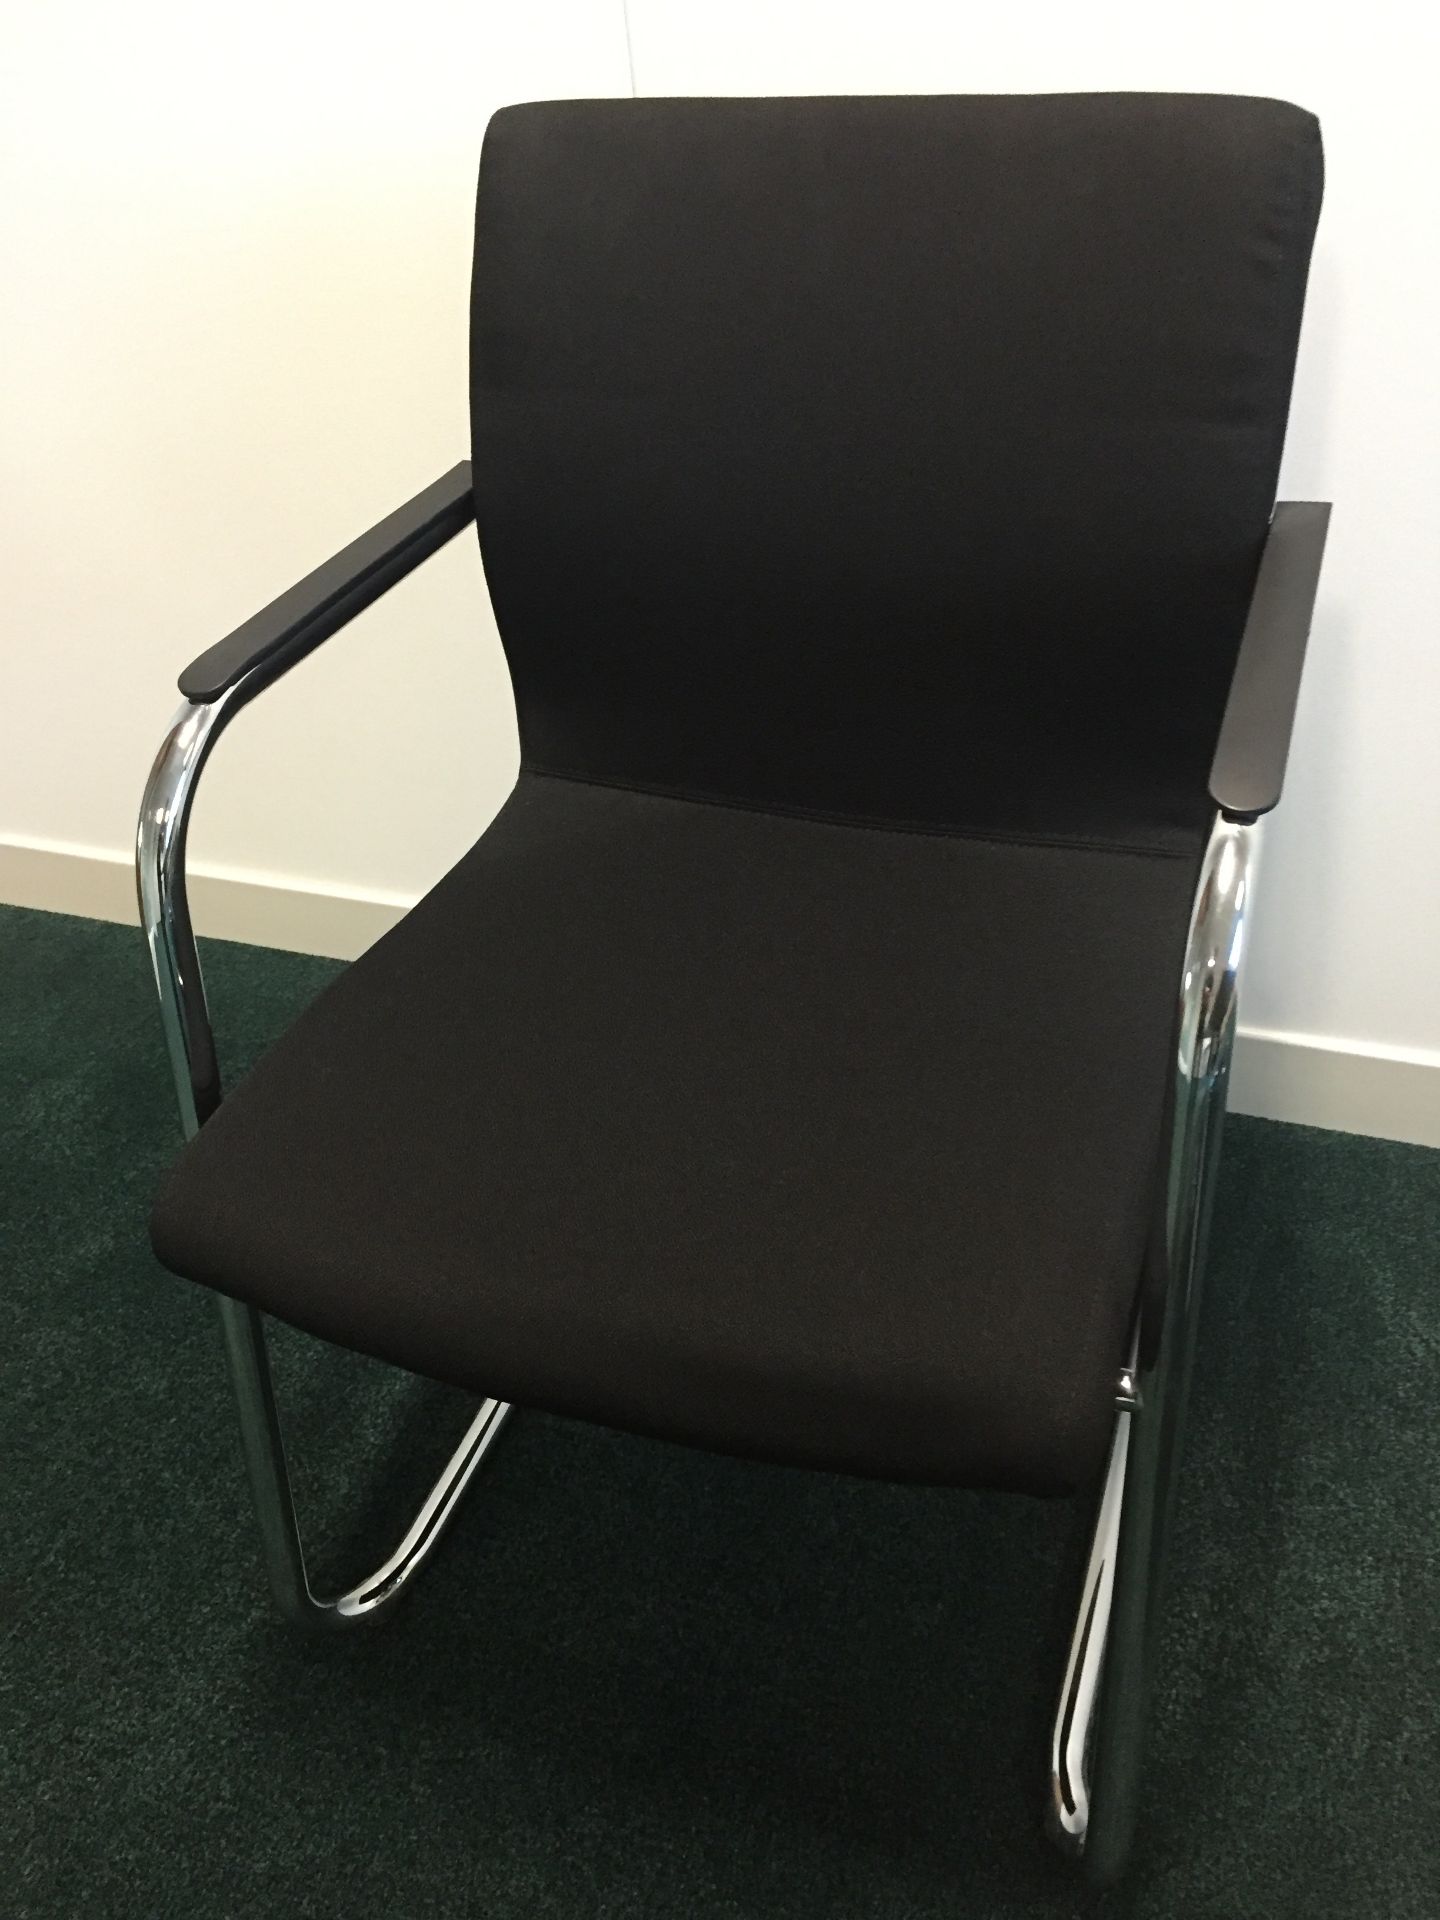 1 x Designer RIM Office Chair - Suitable For Desk Use, Meeting Tables or Conference Rooms - Features - Image 2 of 6